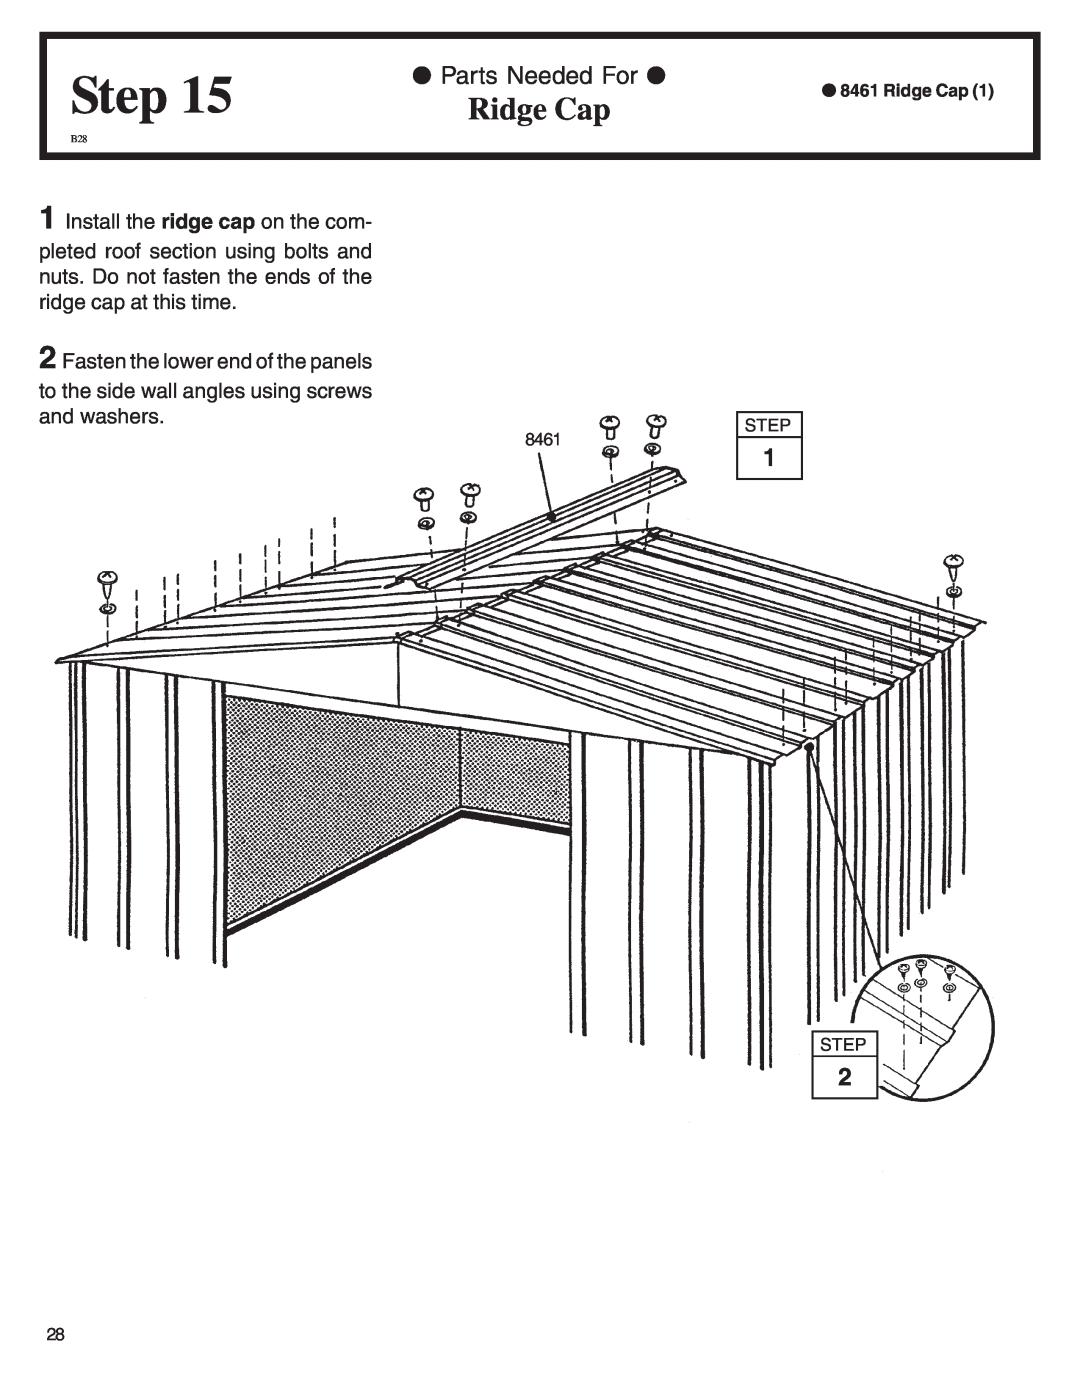 Arrow Plastic WL86-A Ridge Cap, Step, Fasten the lower end of the panels, to the side wall angles using screws and washers 